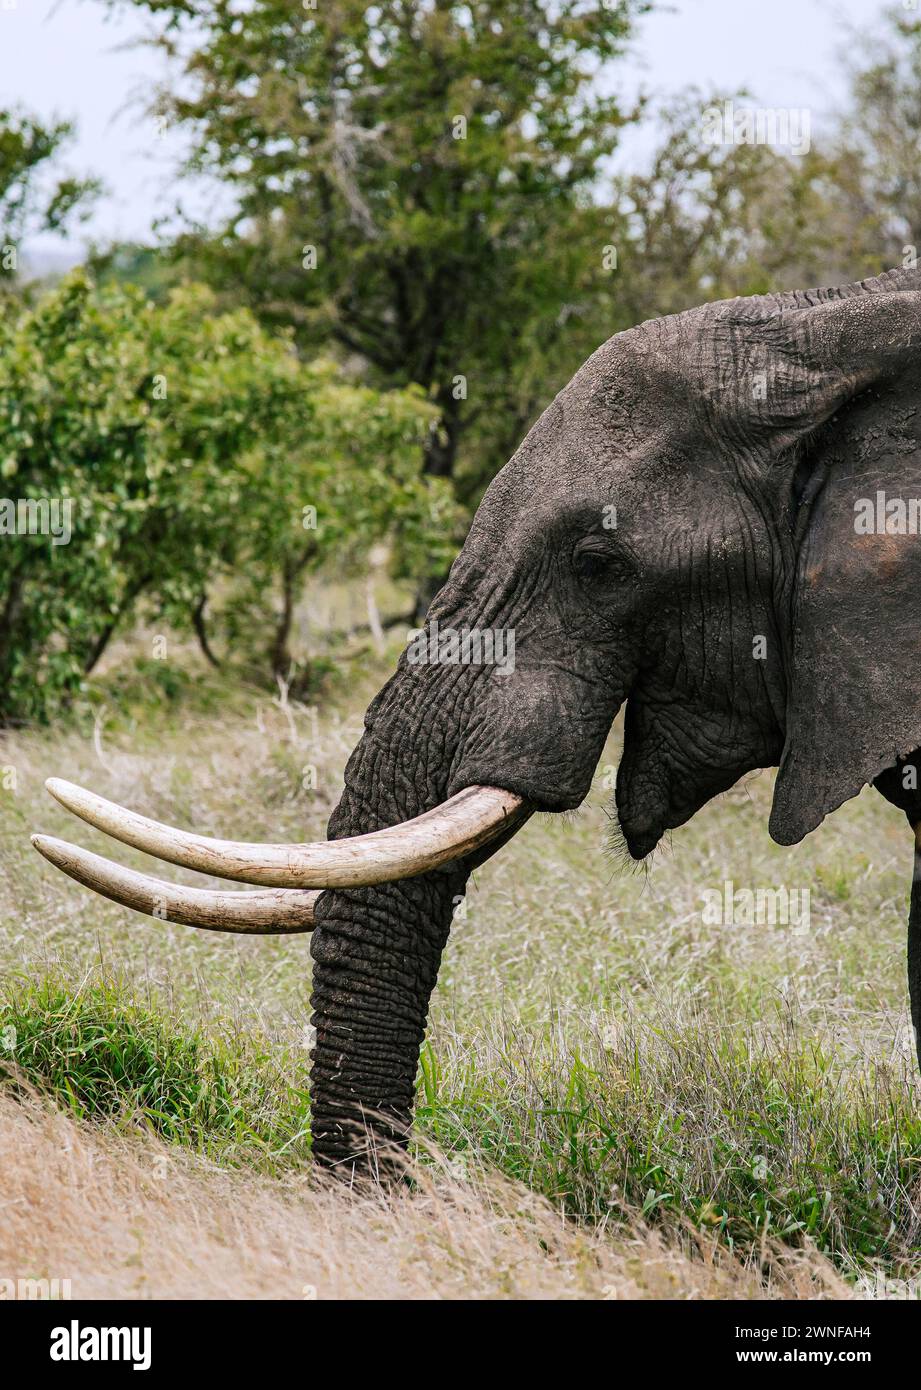 Head African elephant with open mouth, close up portrait, side view. Safari in savanna, South Africa, Kruger National Park. Animals natural habitat, w Stock Photo